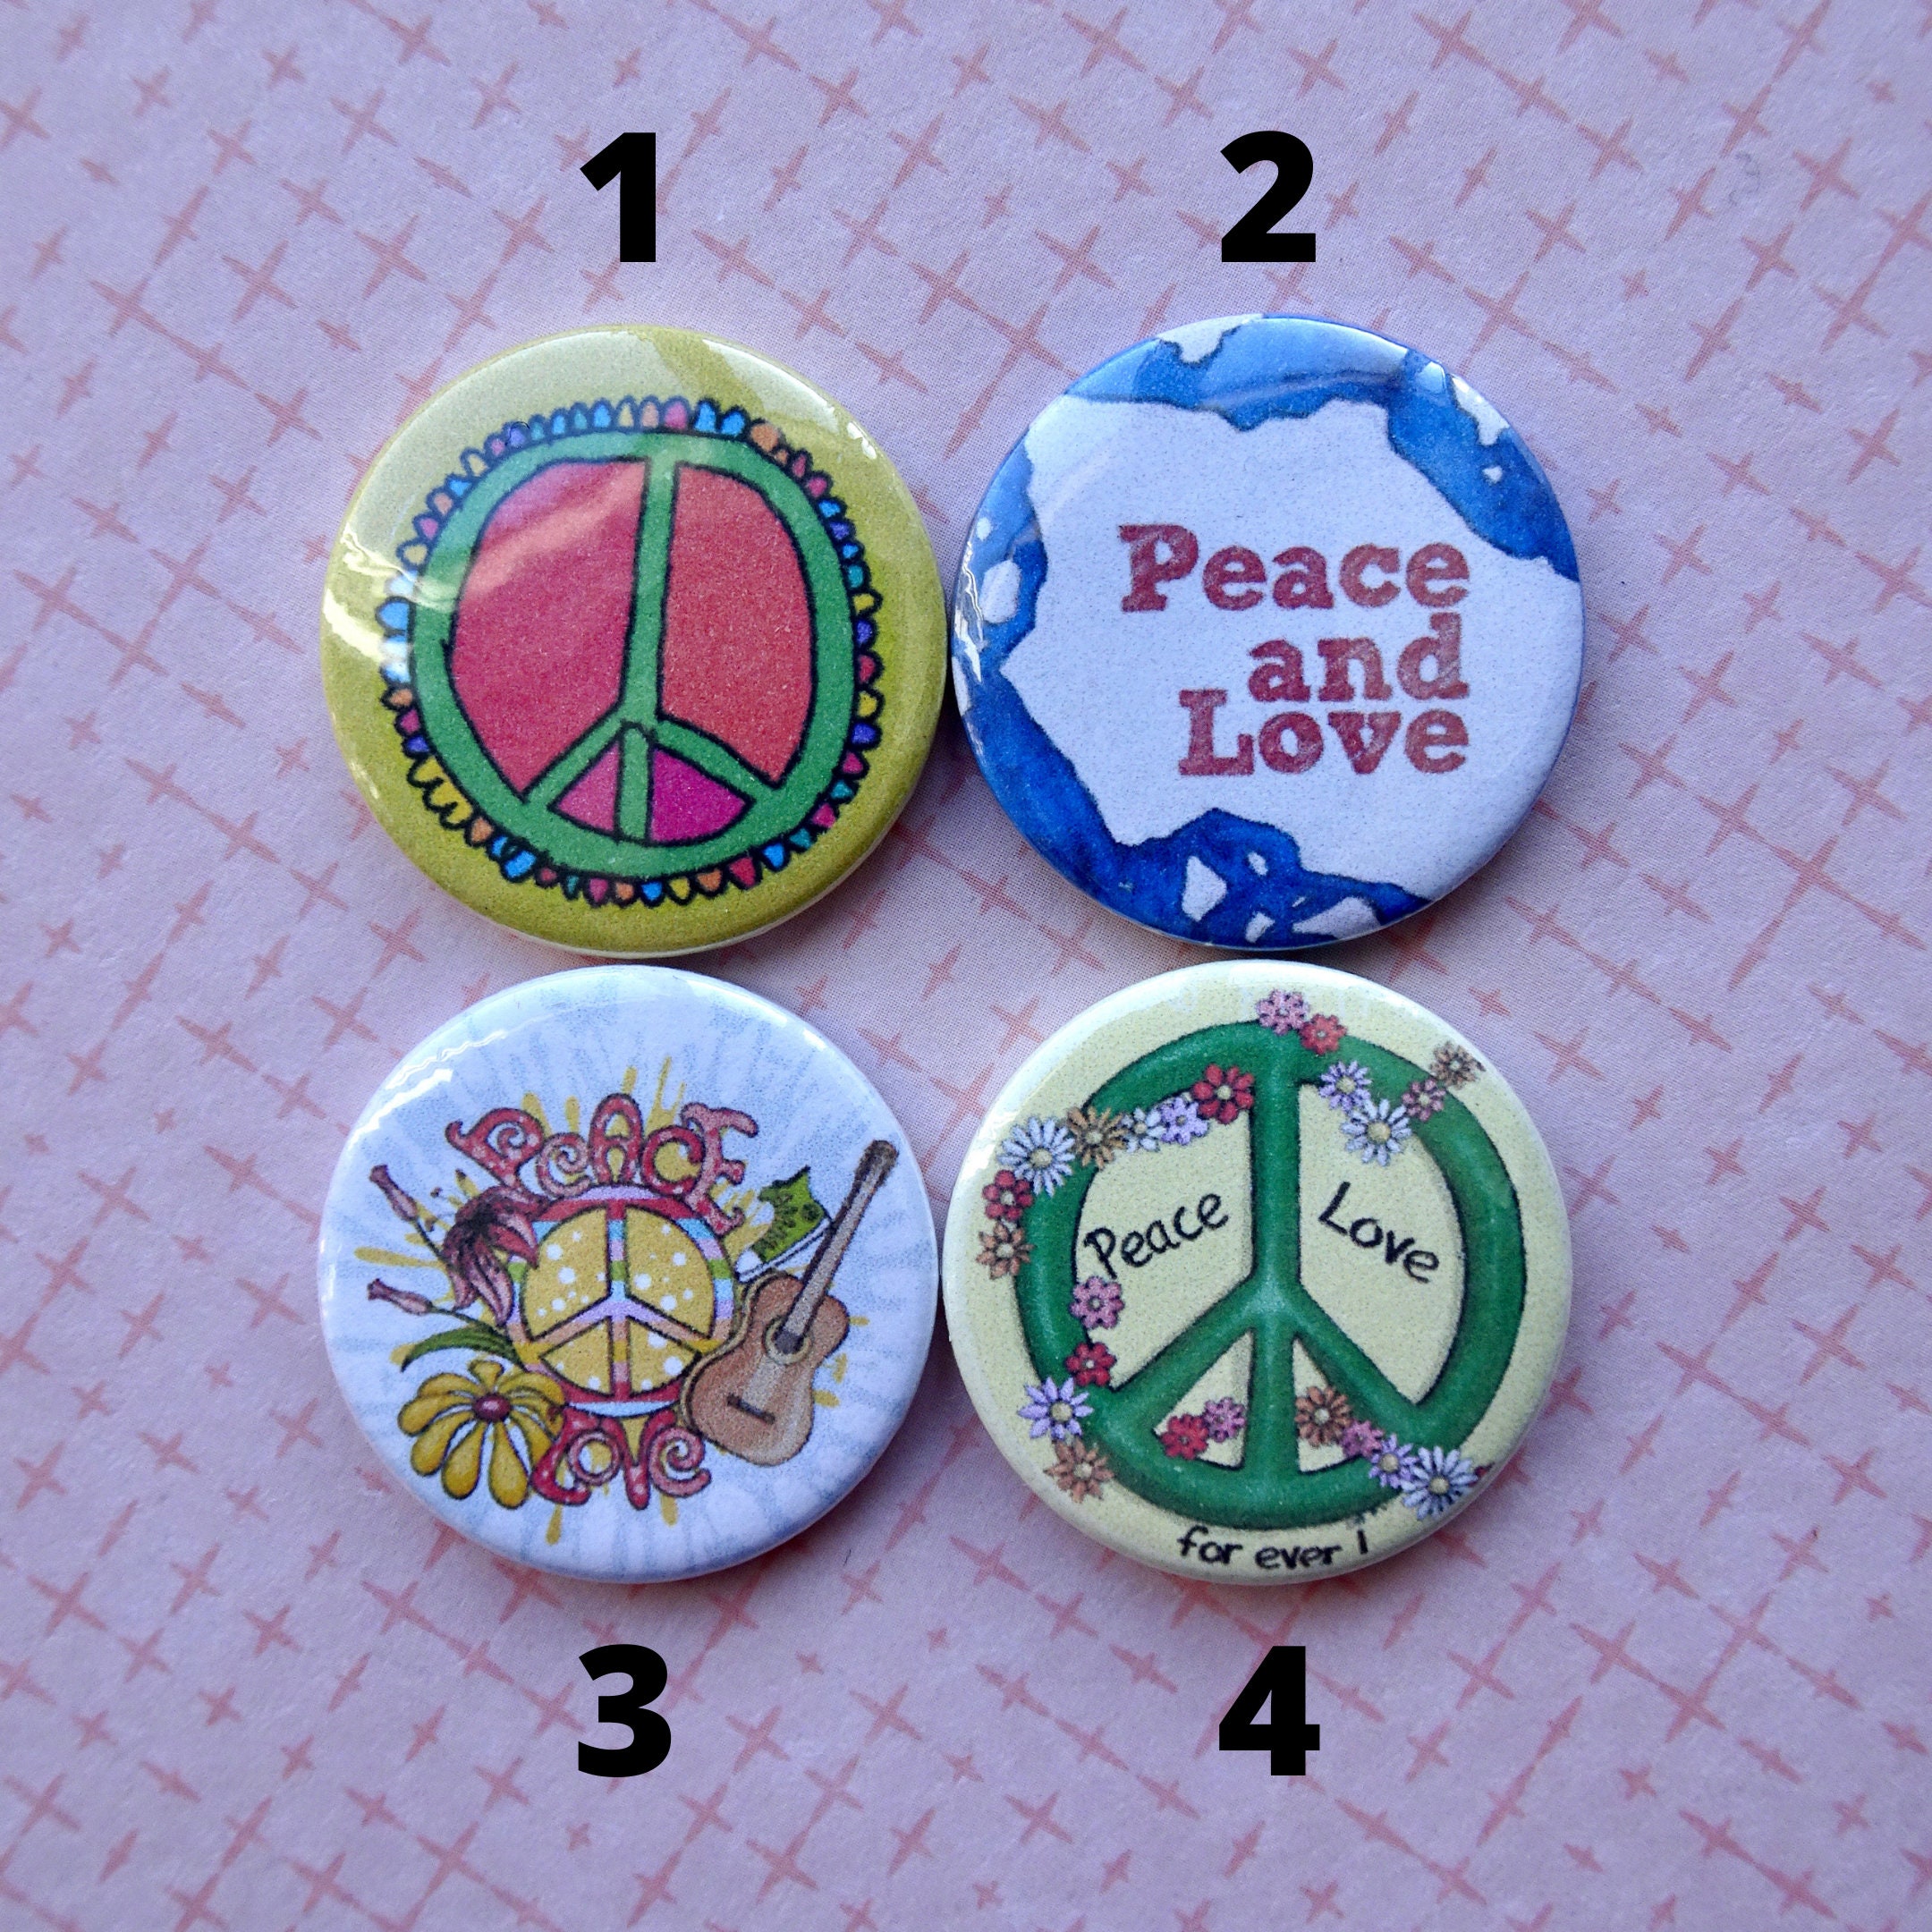 Peace and love-flowers 3-25mm button badge pin 